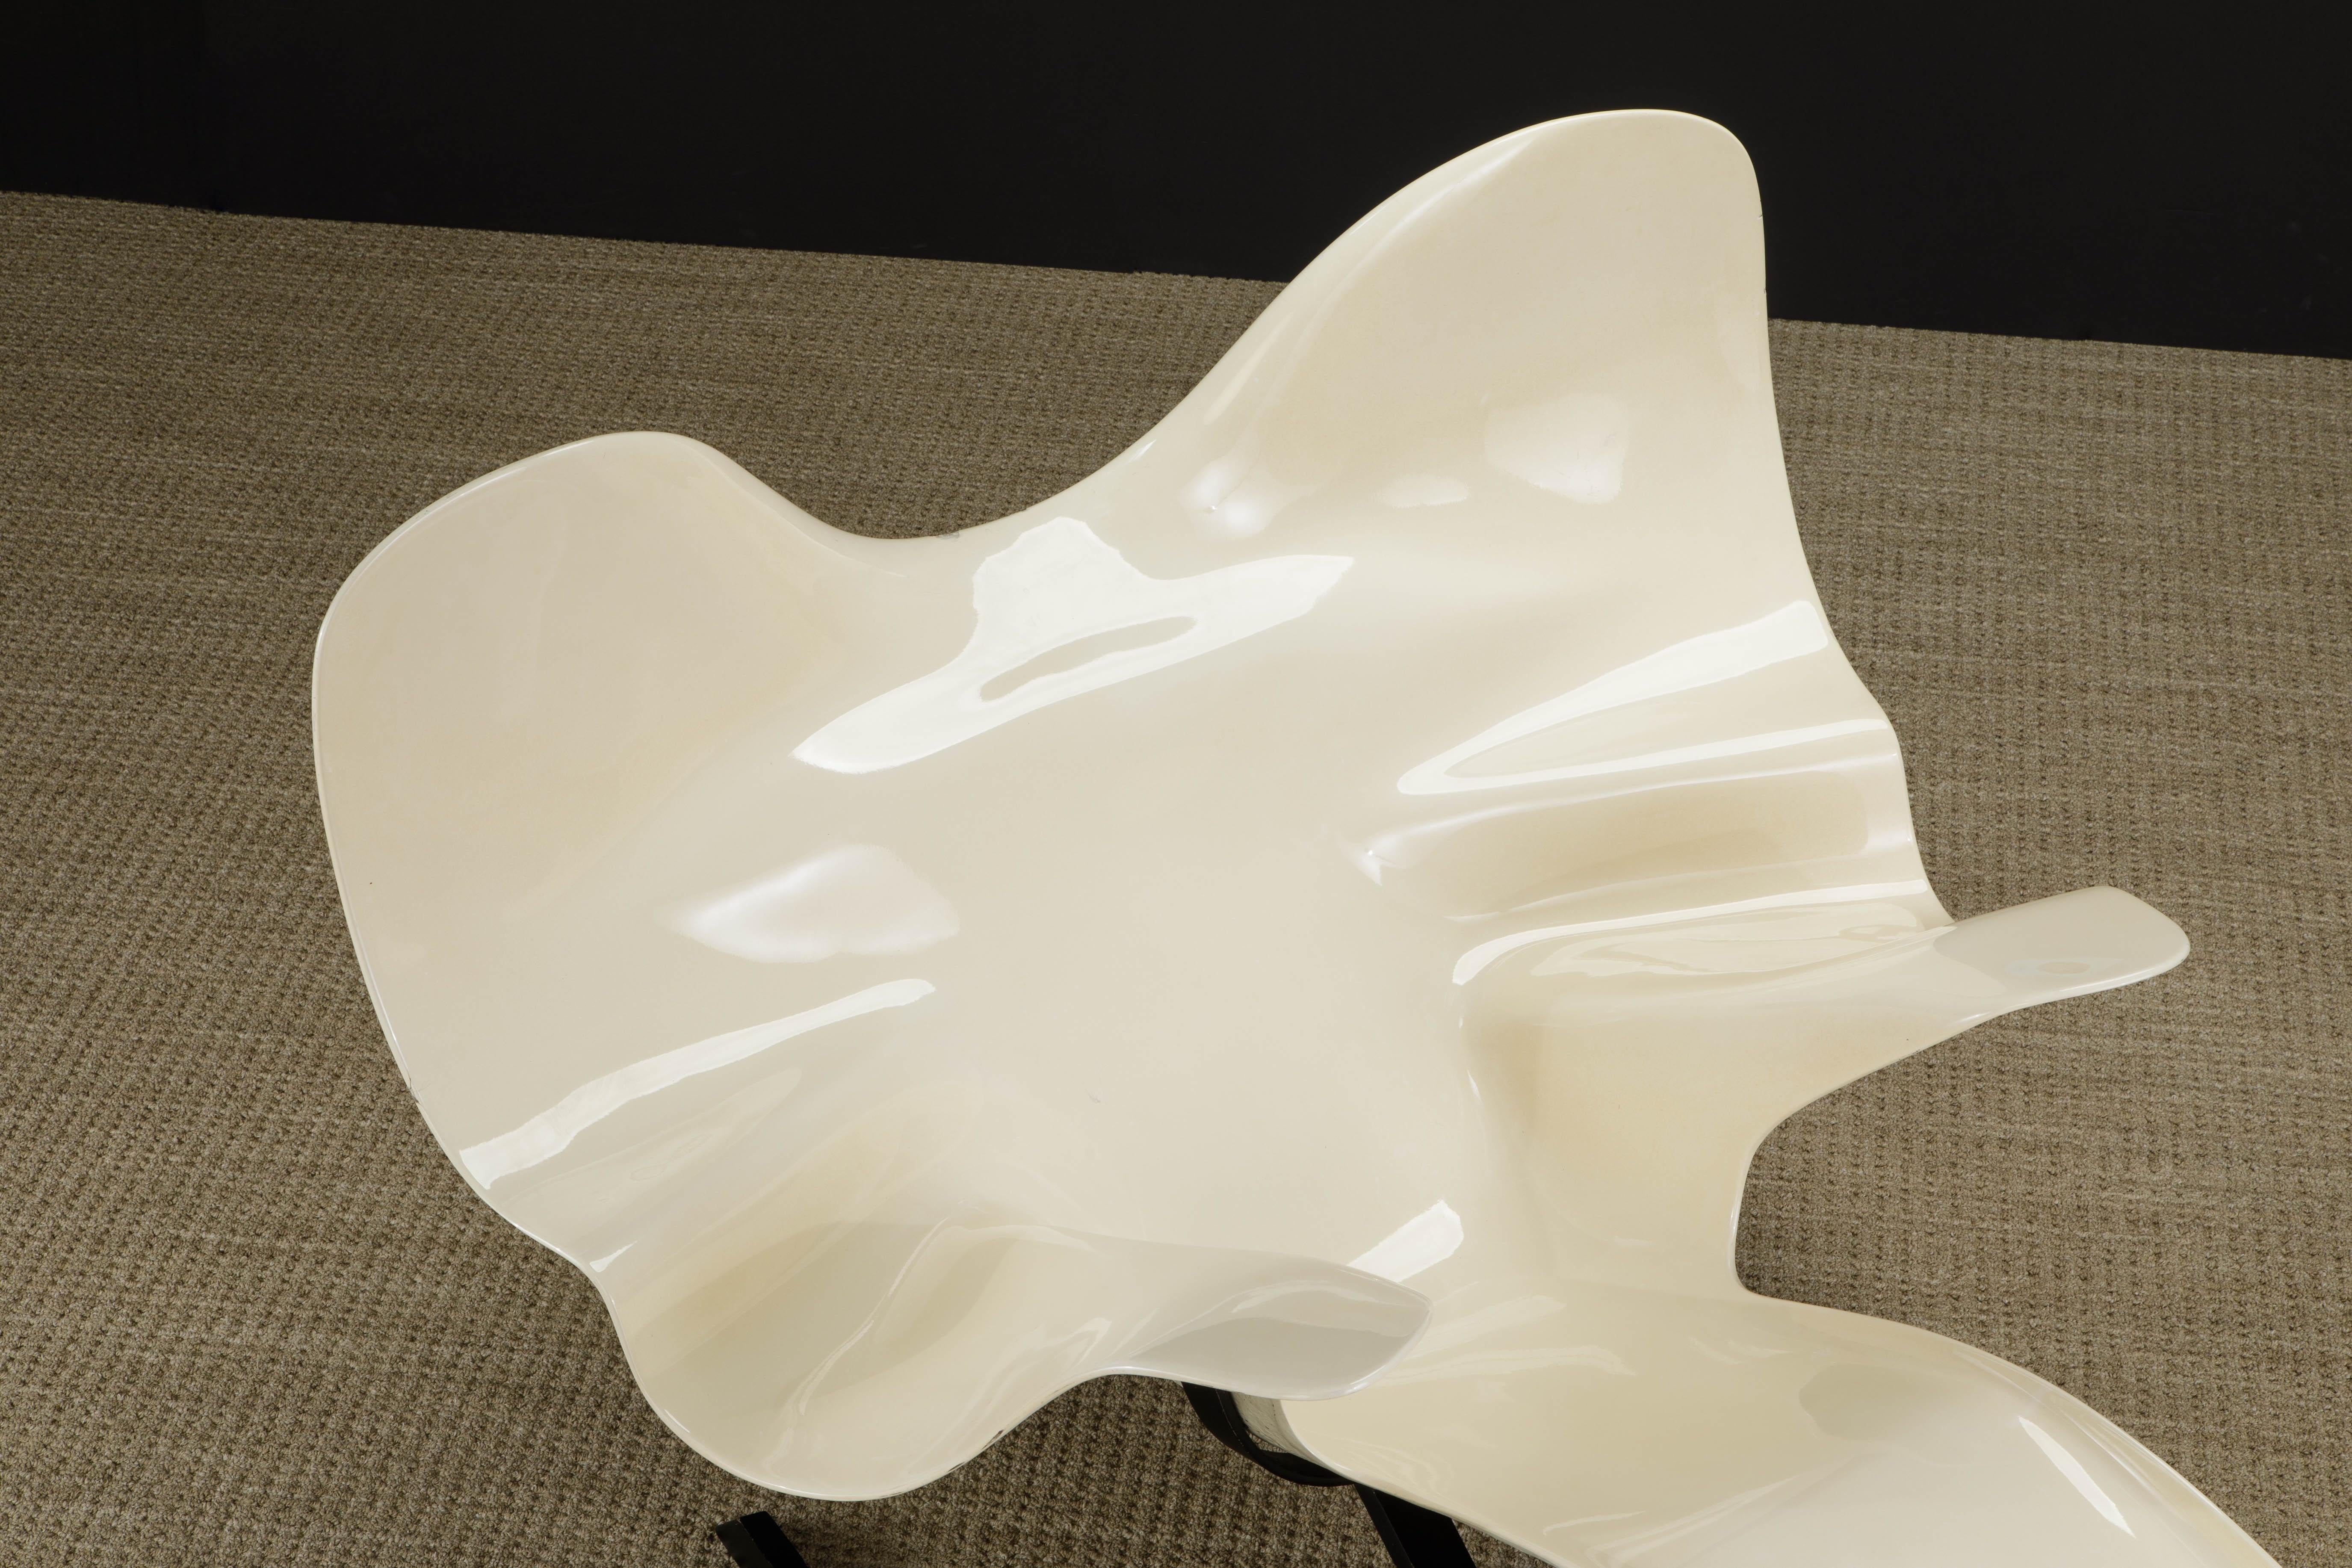 Limited Edition 'Elephant Chair' by Bernard Rancillac, 1985, Signed & Numbered 4